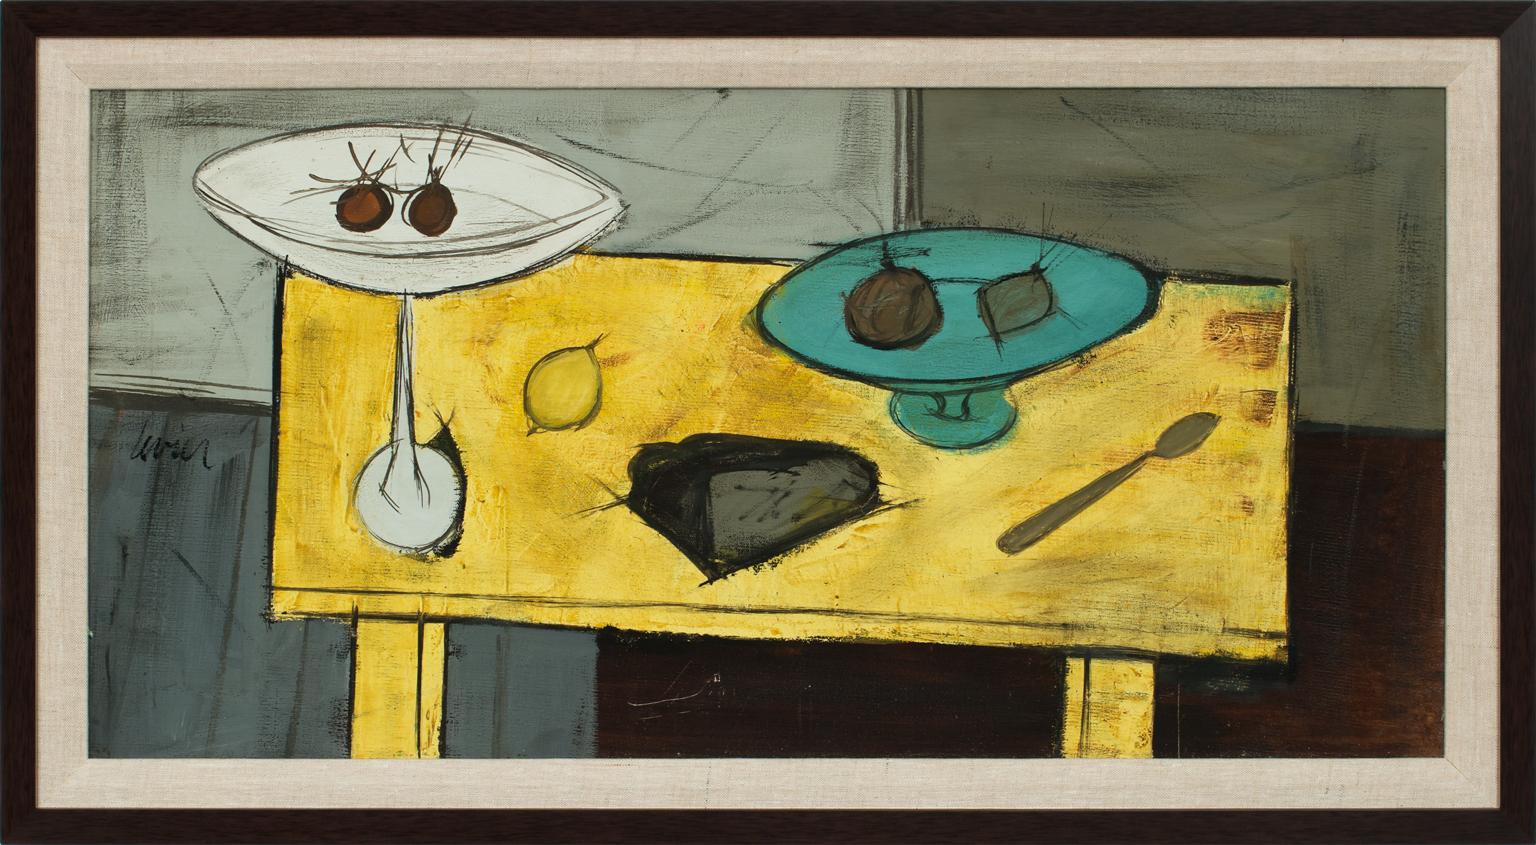 Untitled [Avec Table Jaune], an original oil on canvas by Charles Levier, is a piece for the true collector. Levier's vivid detail projects from the painting, immediately capturing the viewer's attention, highlighting the artist's keen ability to